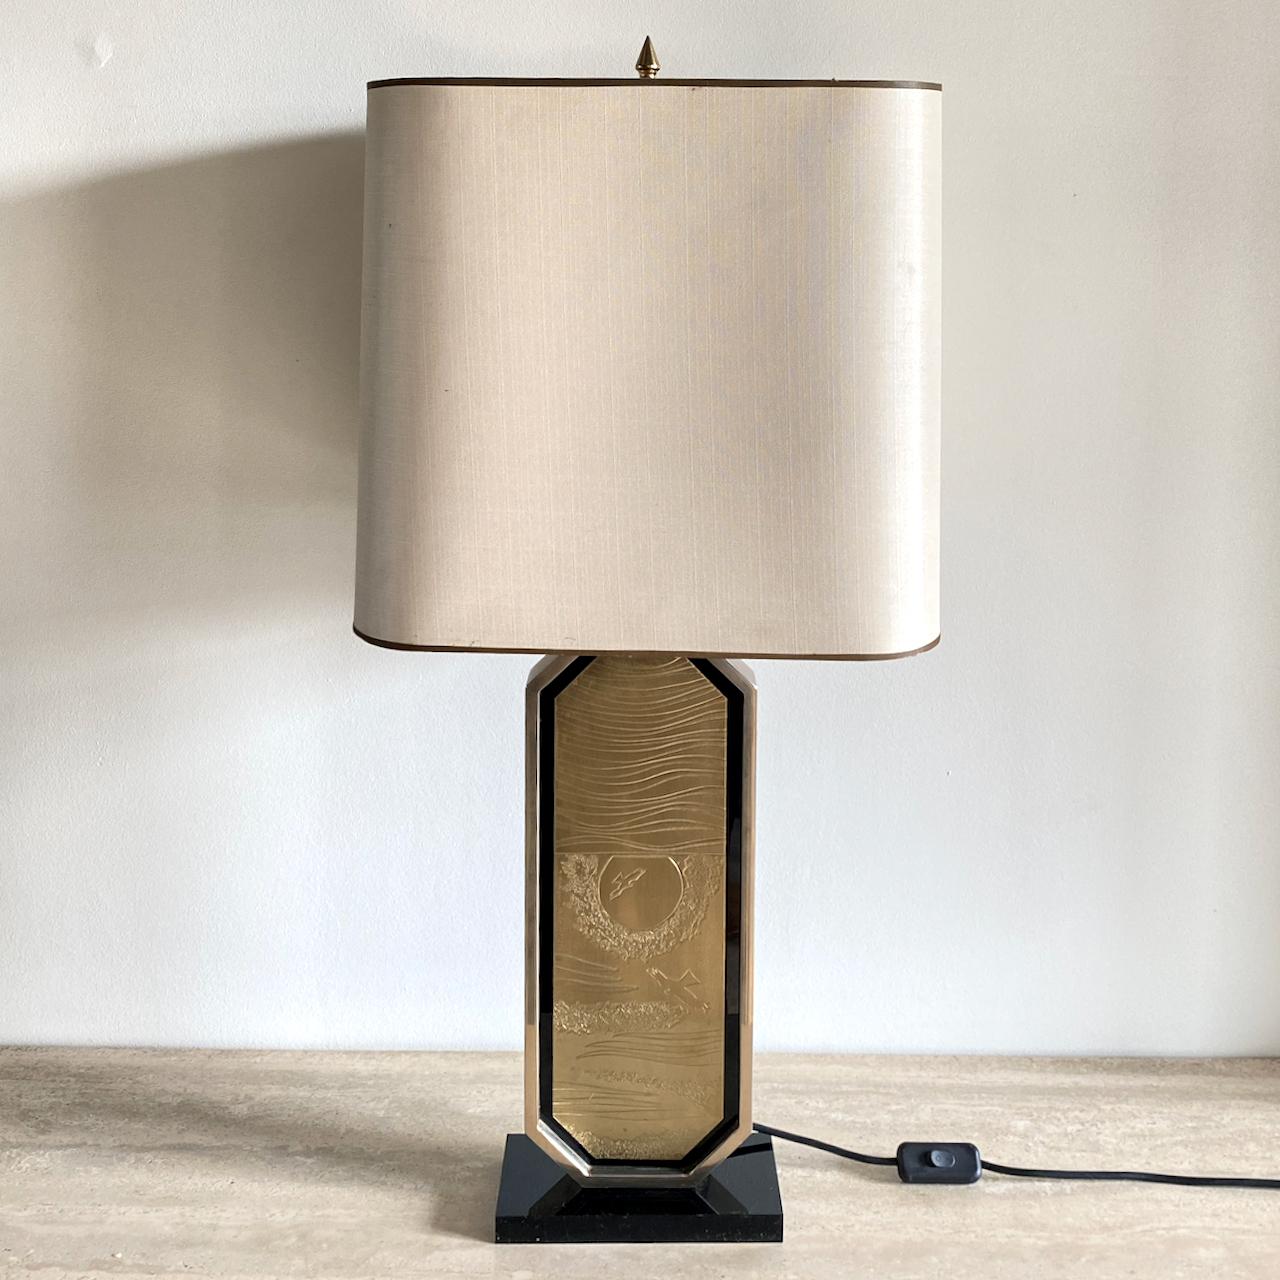 George Mathias 23kt gold plated table lamp 1970's For Sale 2